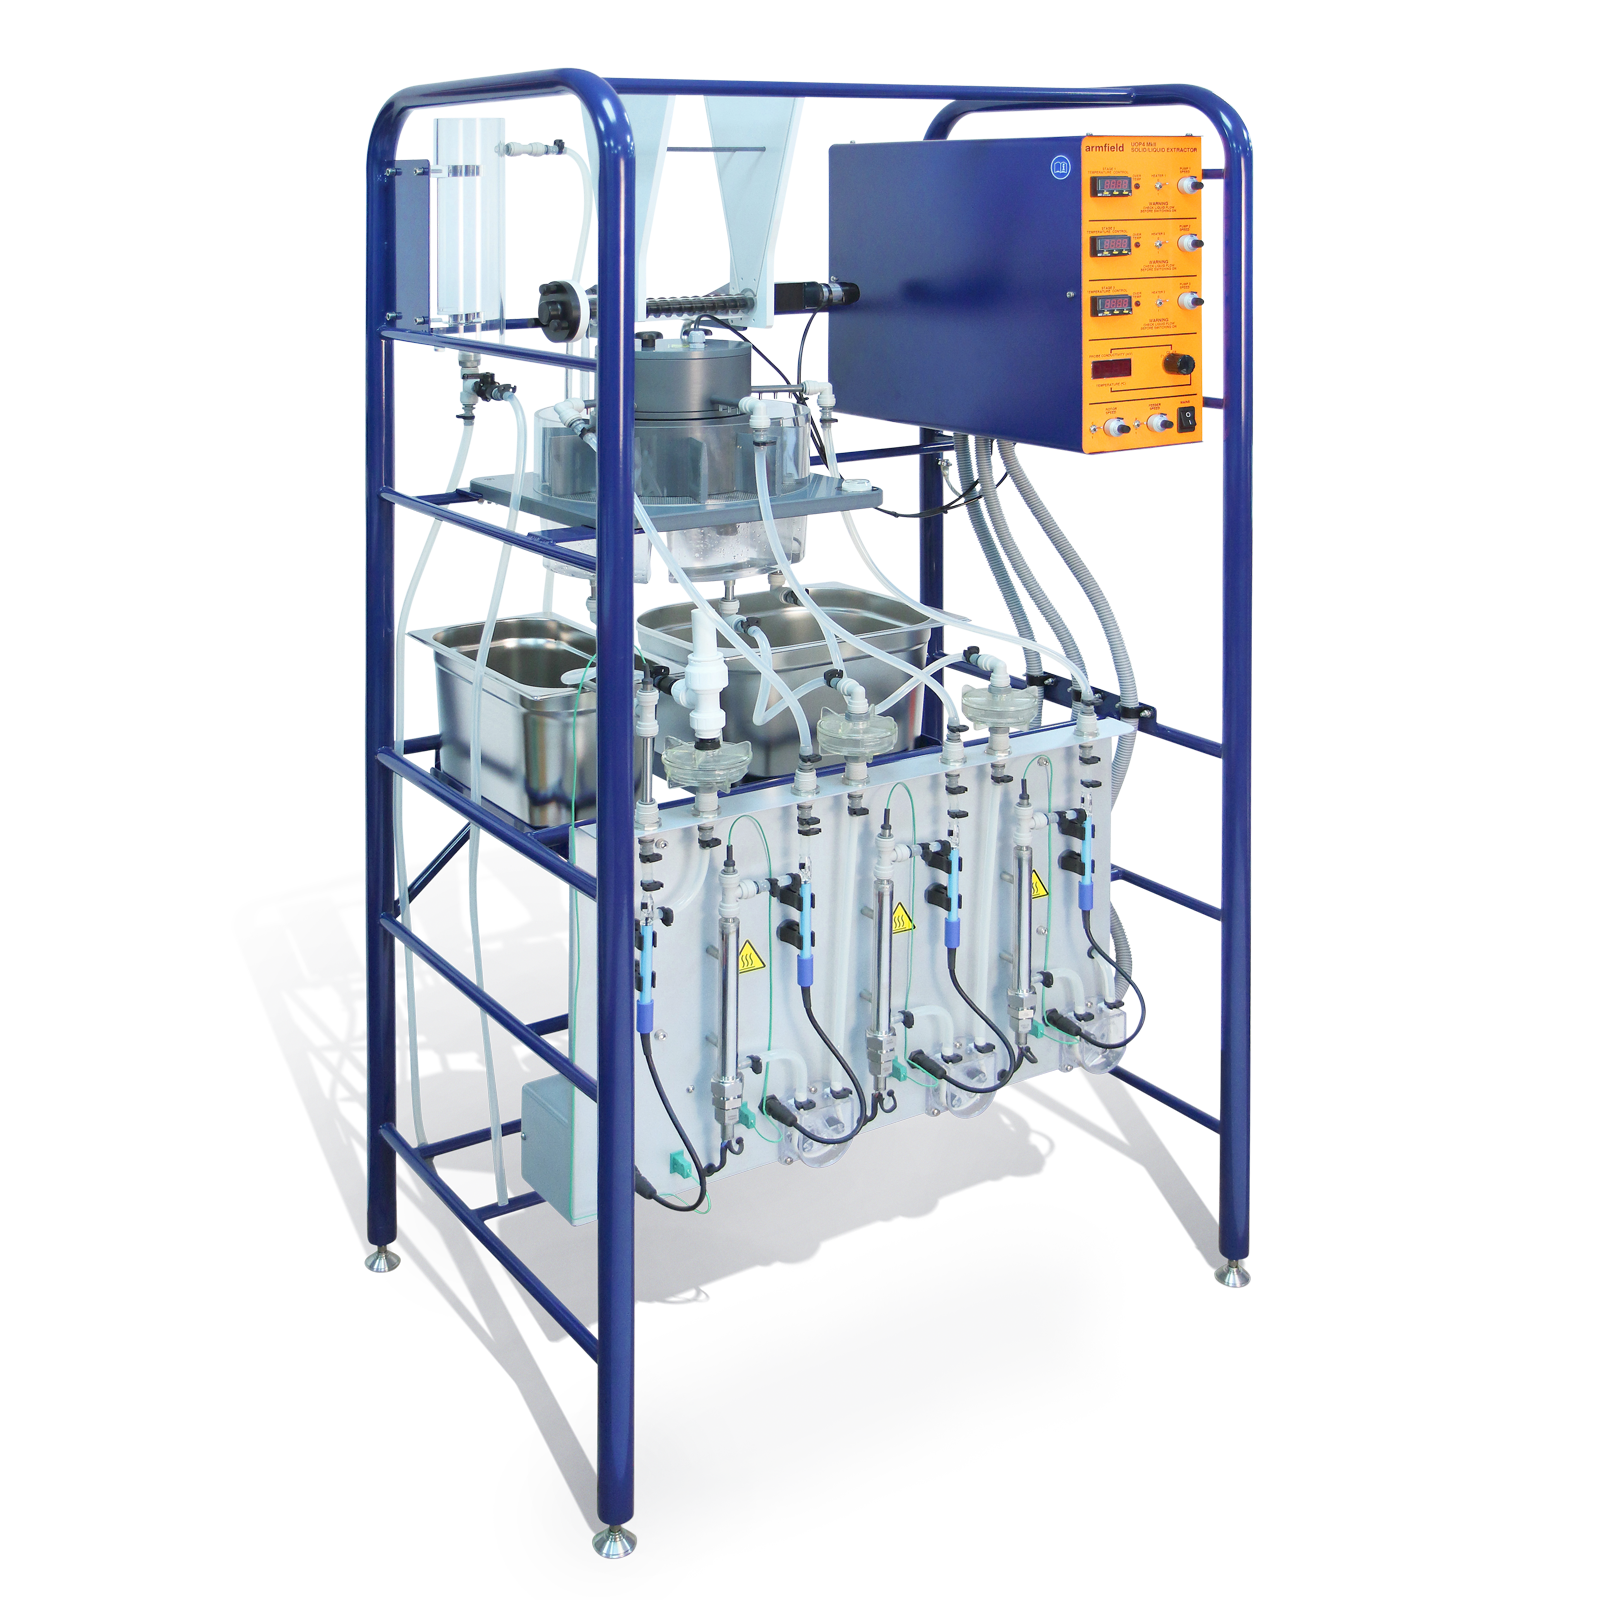 https://armfield.co.uk/wp-content/uploads/2020/02/UOP4MKII-Solid-Liquid-Extraction-Unit-Main.png